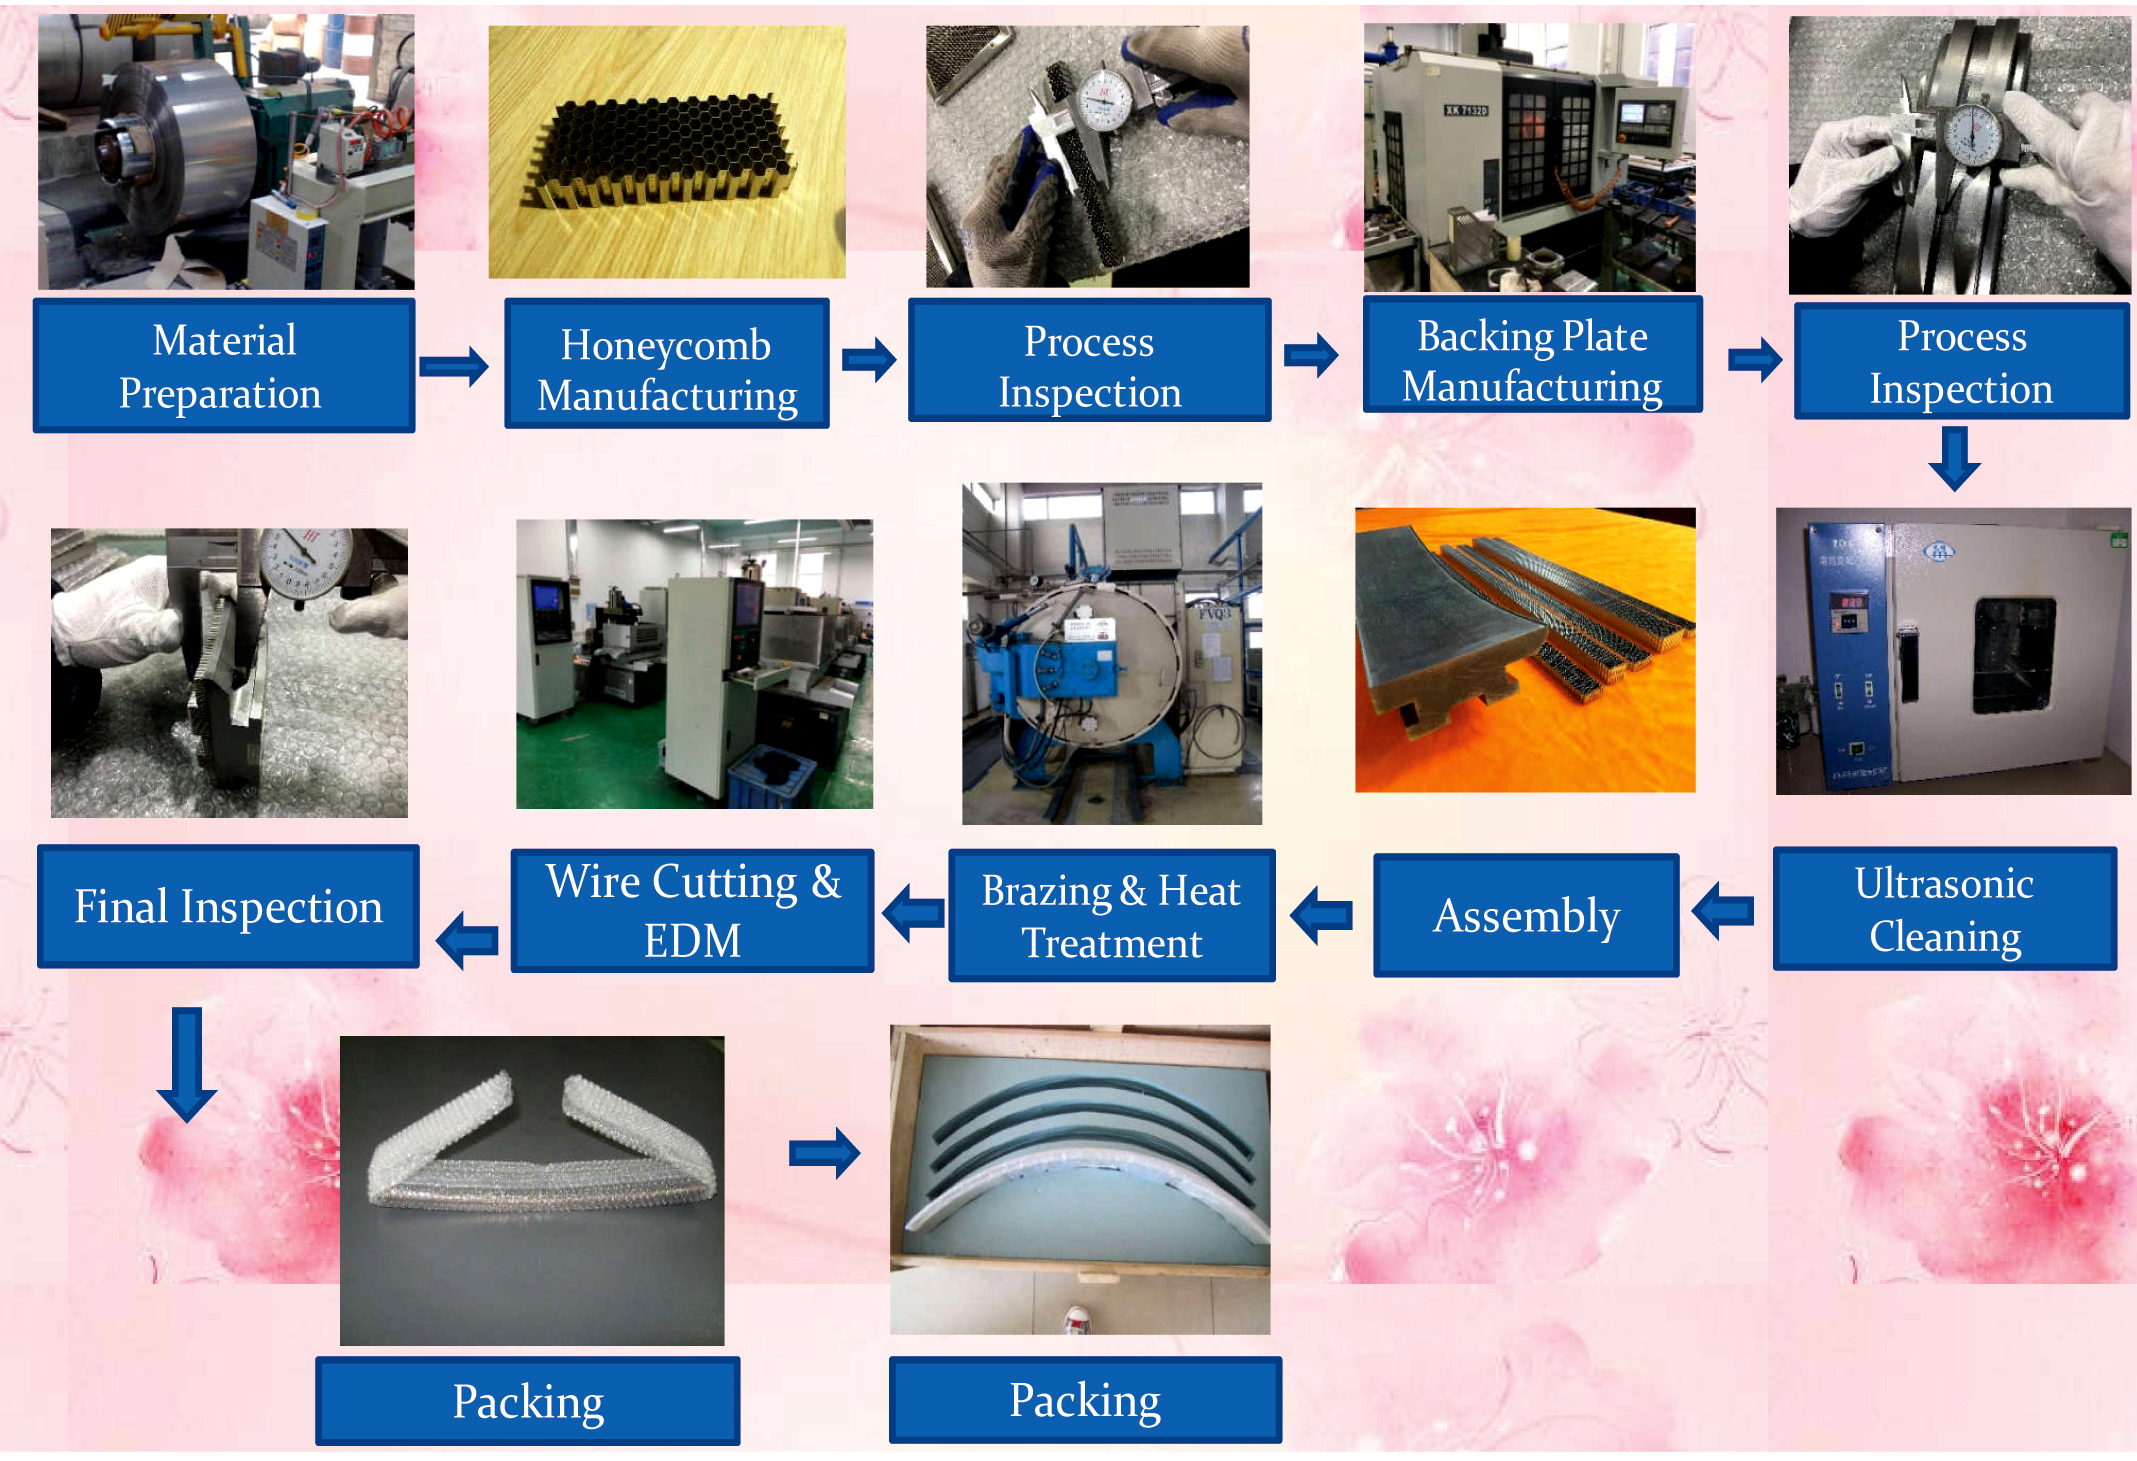 Manufacturing process of honeycomb seal